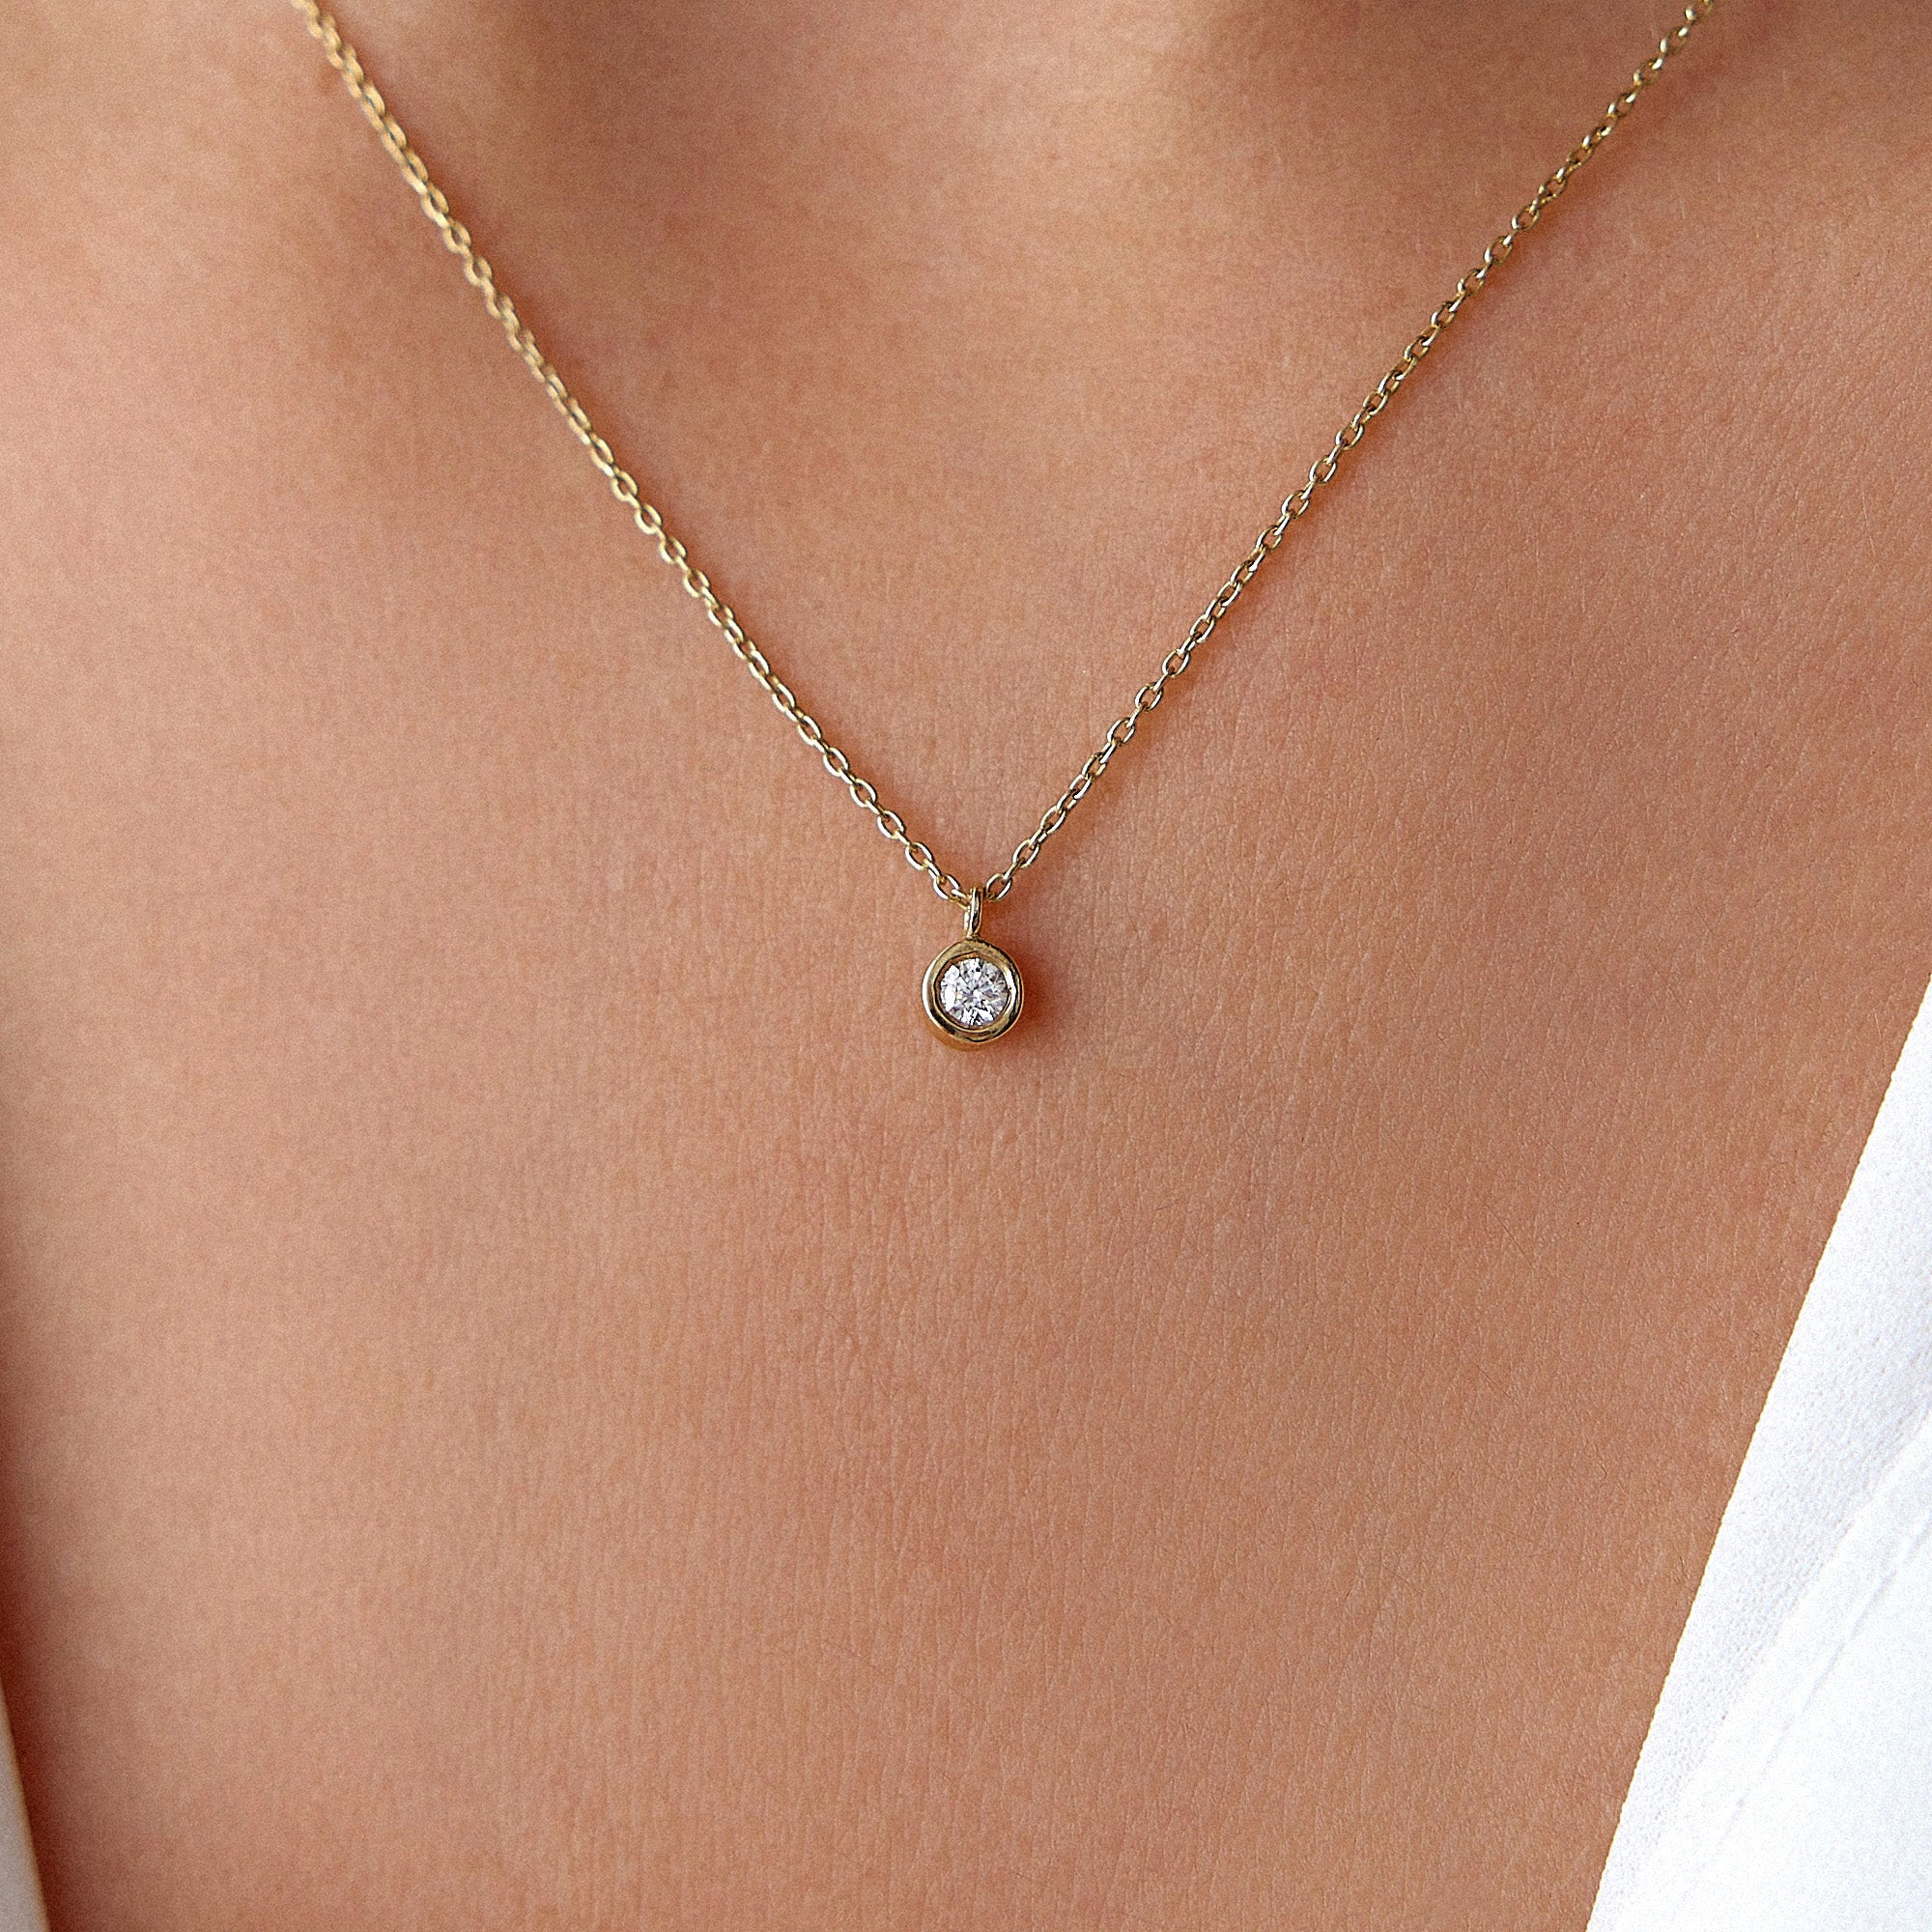 Bezel Set Solitaire Necklace Available in 14K and 18K Gold